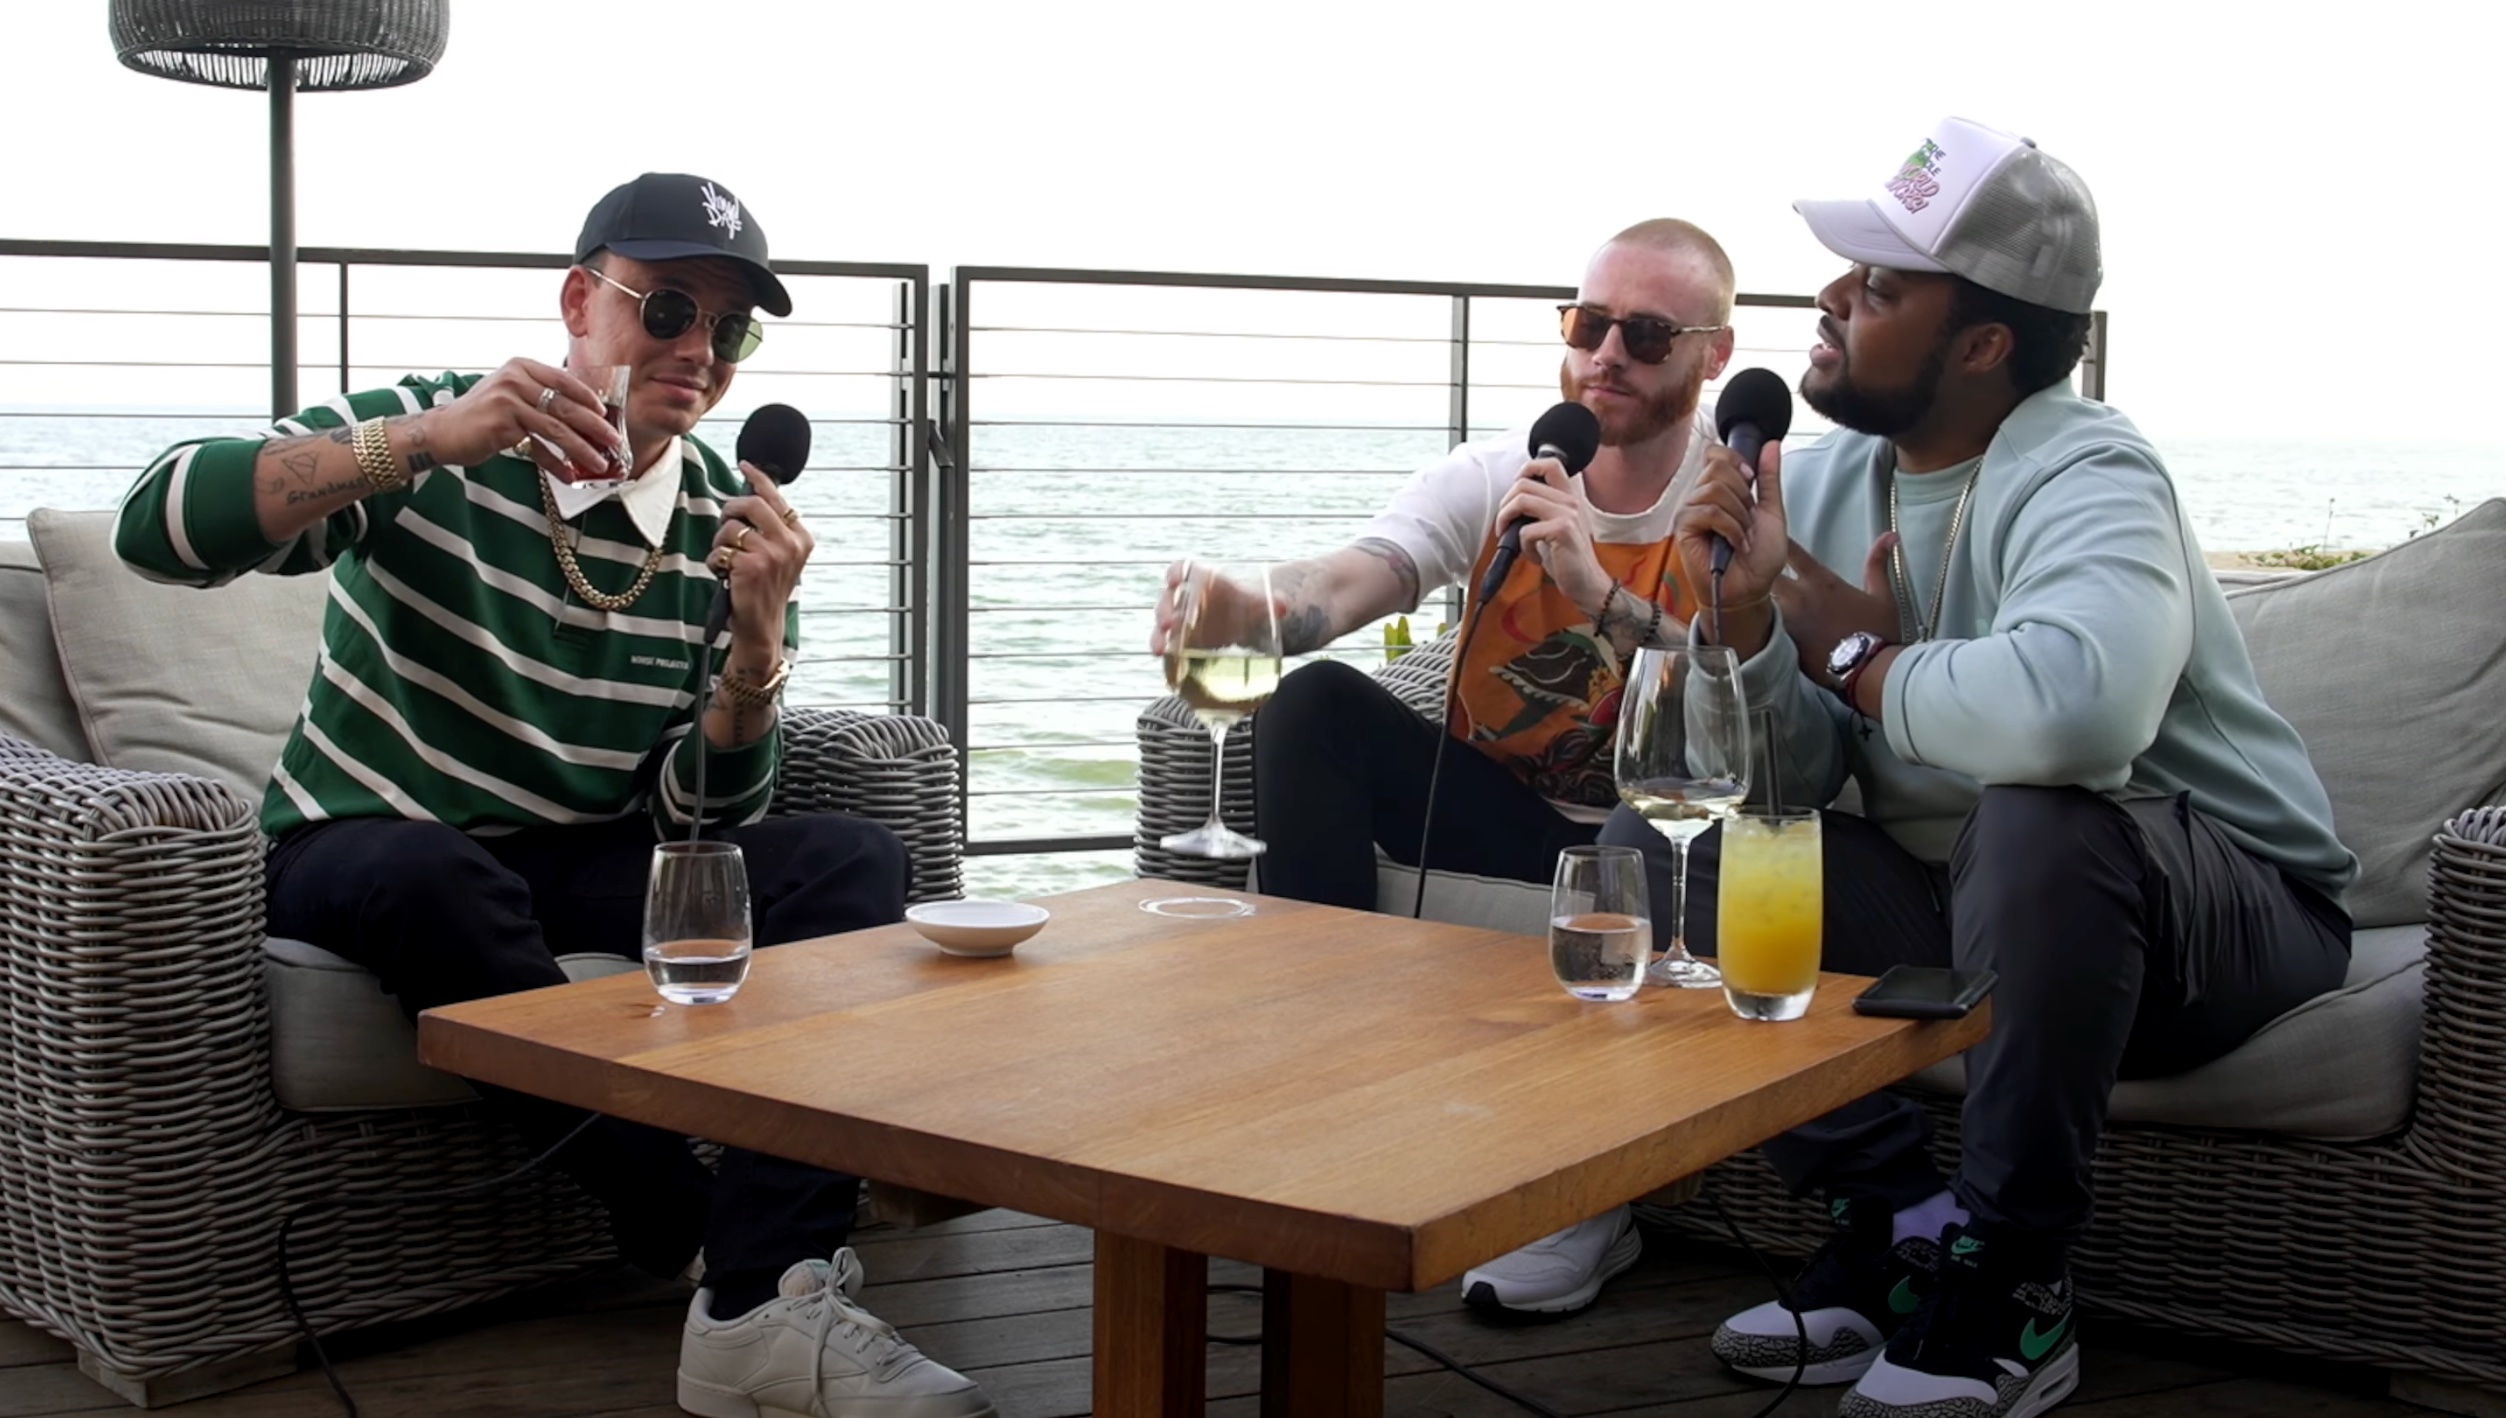 Logic Joins Rory & Mal For Their Latest Episode (Video)